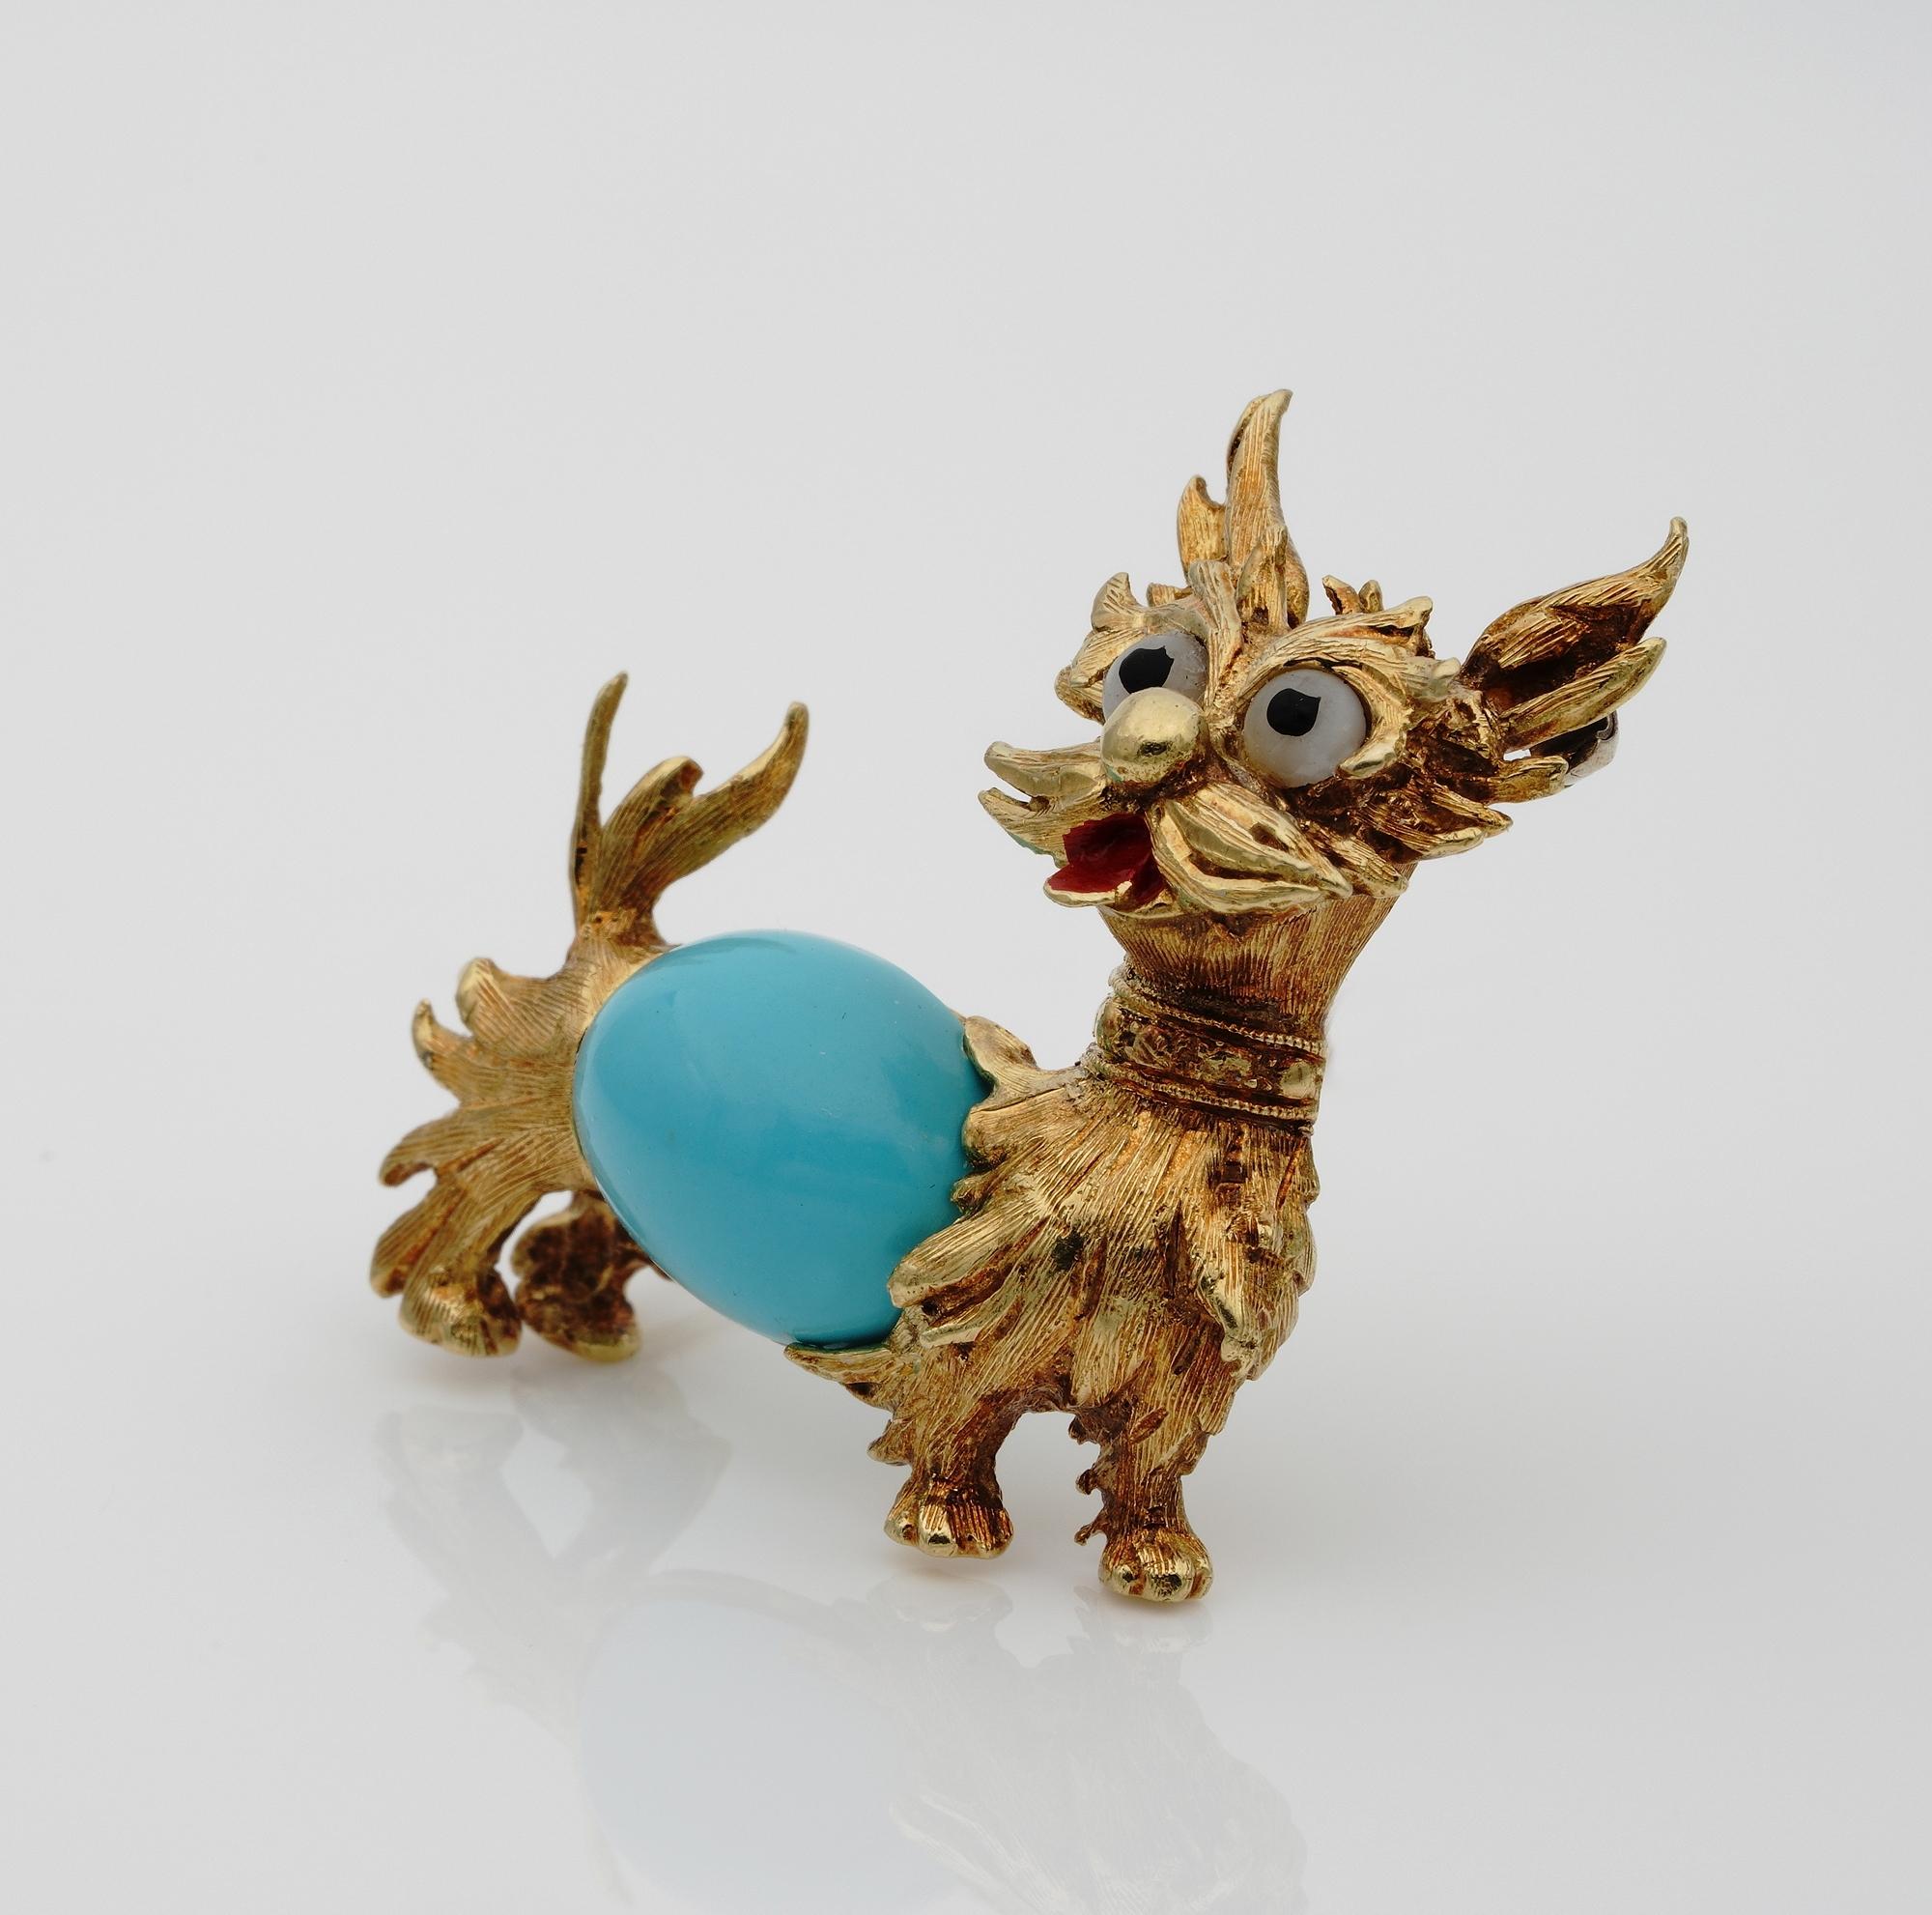 Little Friend

This mid-century brooch is Italian origin 1950 ca
Hand modeled of solid 18 kt gold like a fancy little dog, beautifully made, hand sculptured, the main body consists of a composite Turquoise stone and two little pearls making the